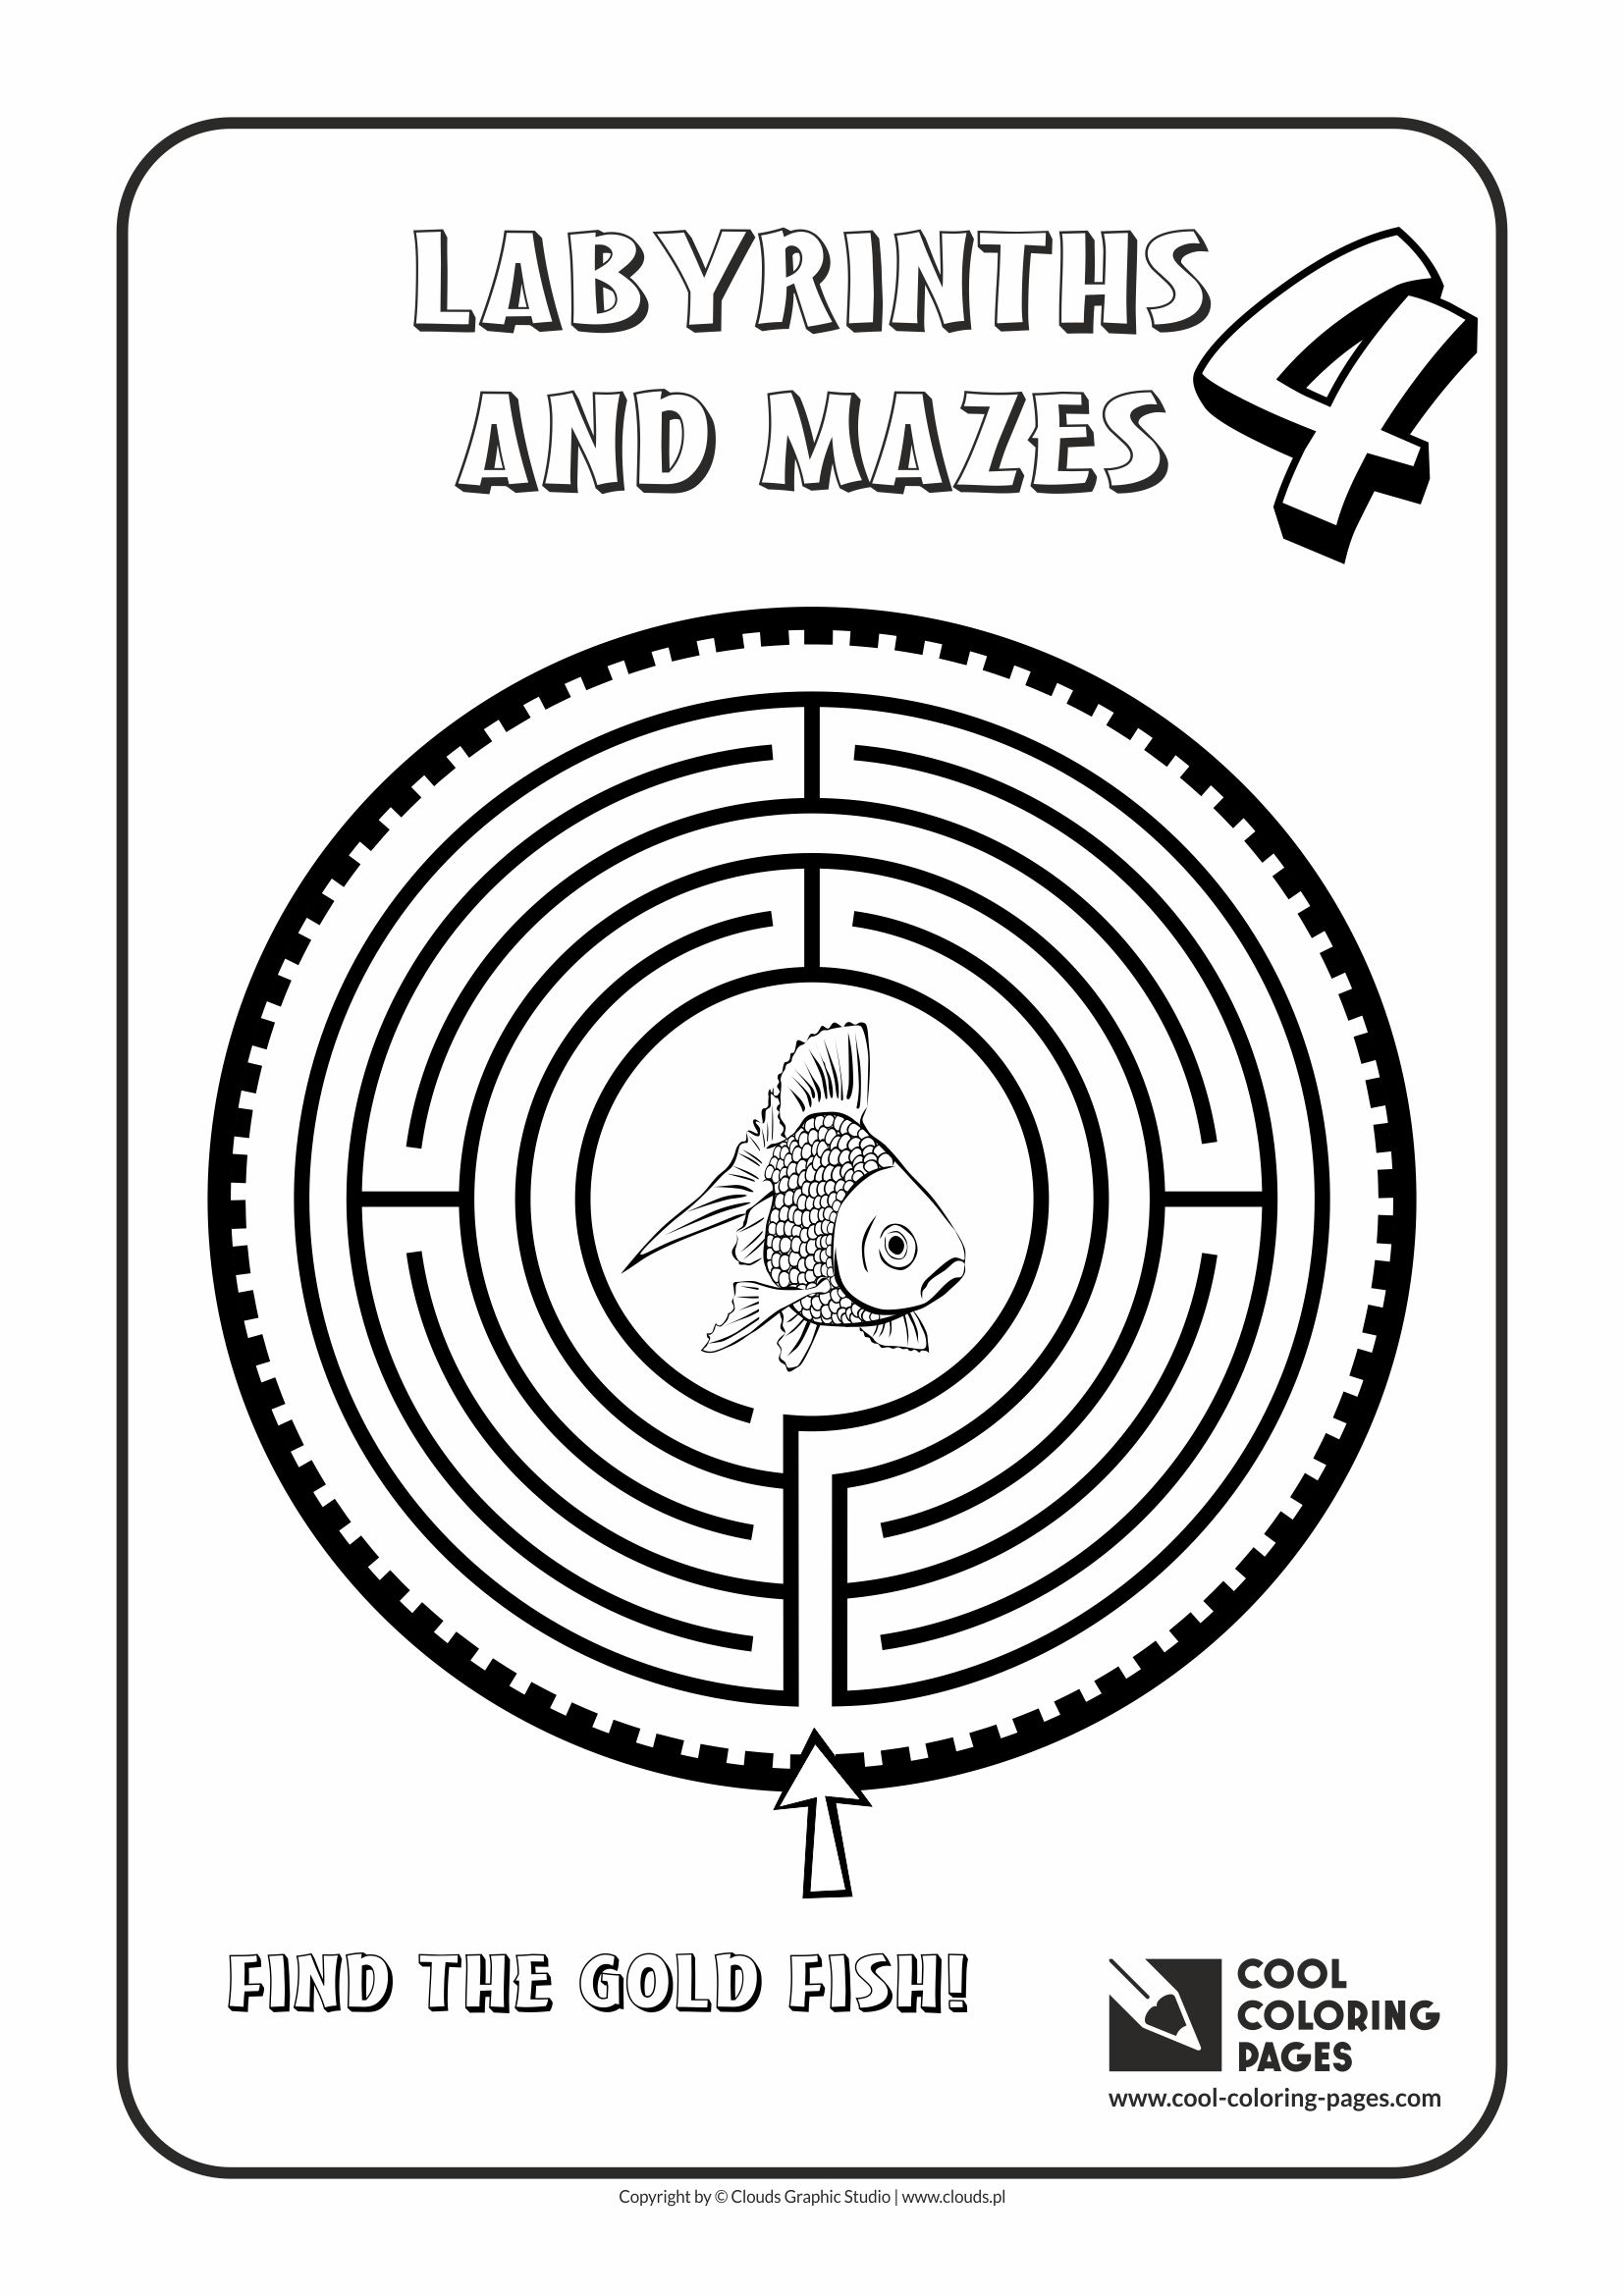 Cool Coloring Pages - Labyrinths and mazes / Maze no 4